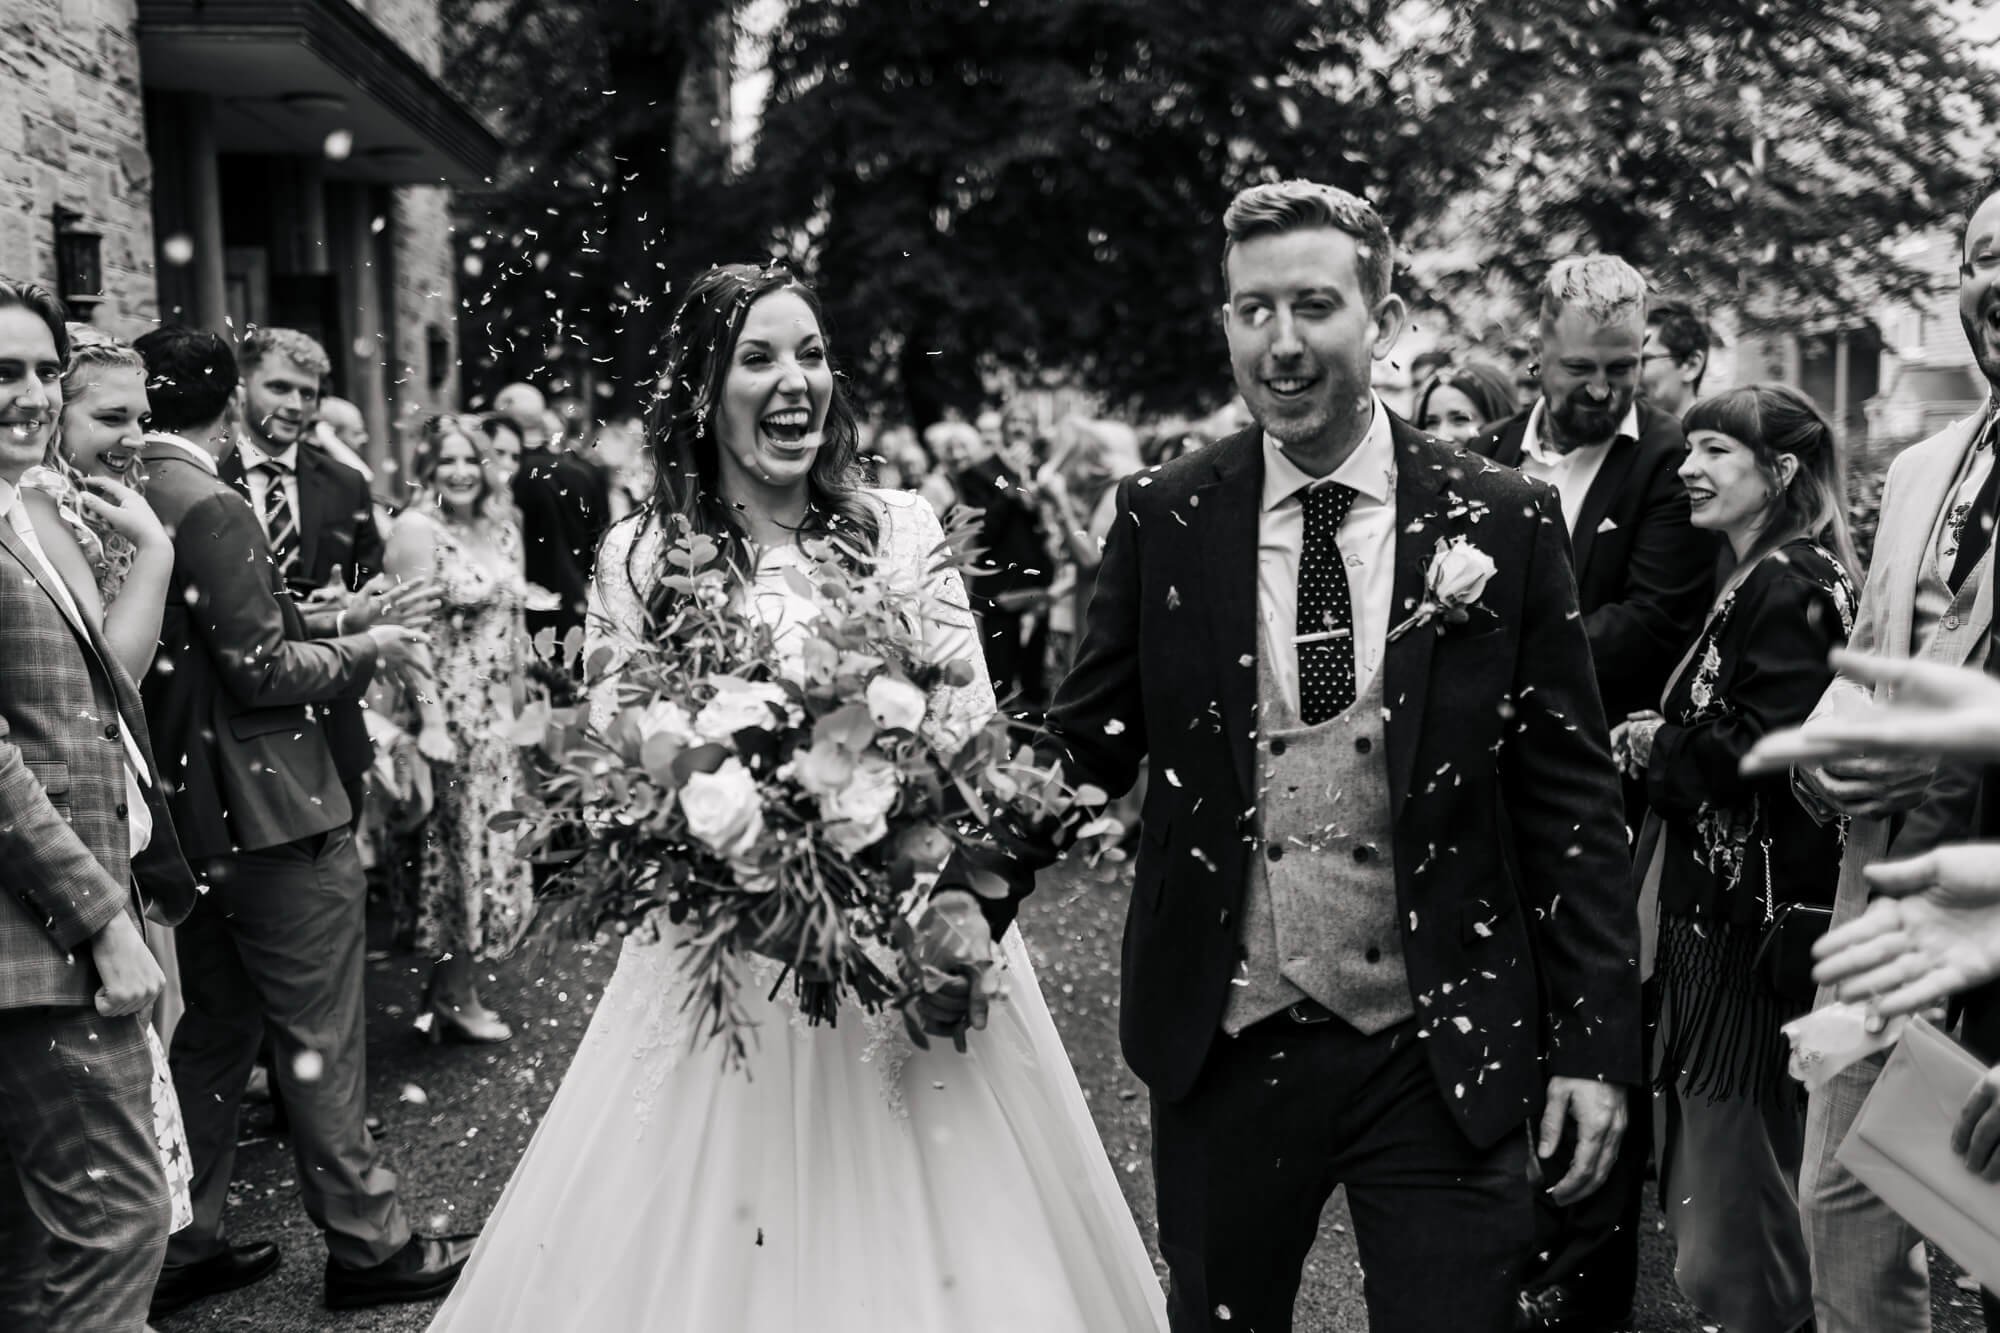 Guests throw confetti at a Leeds wedding